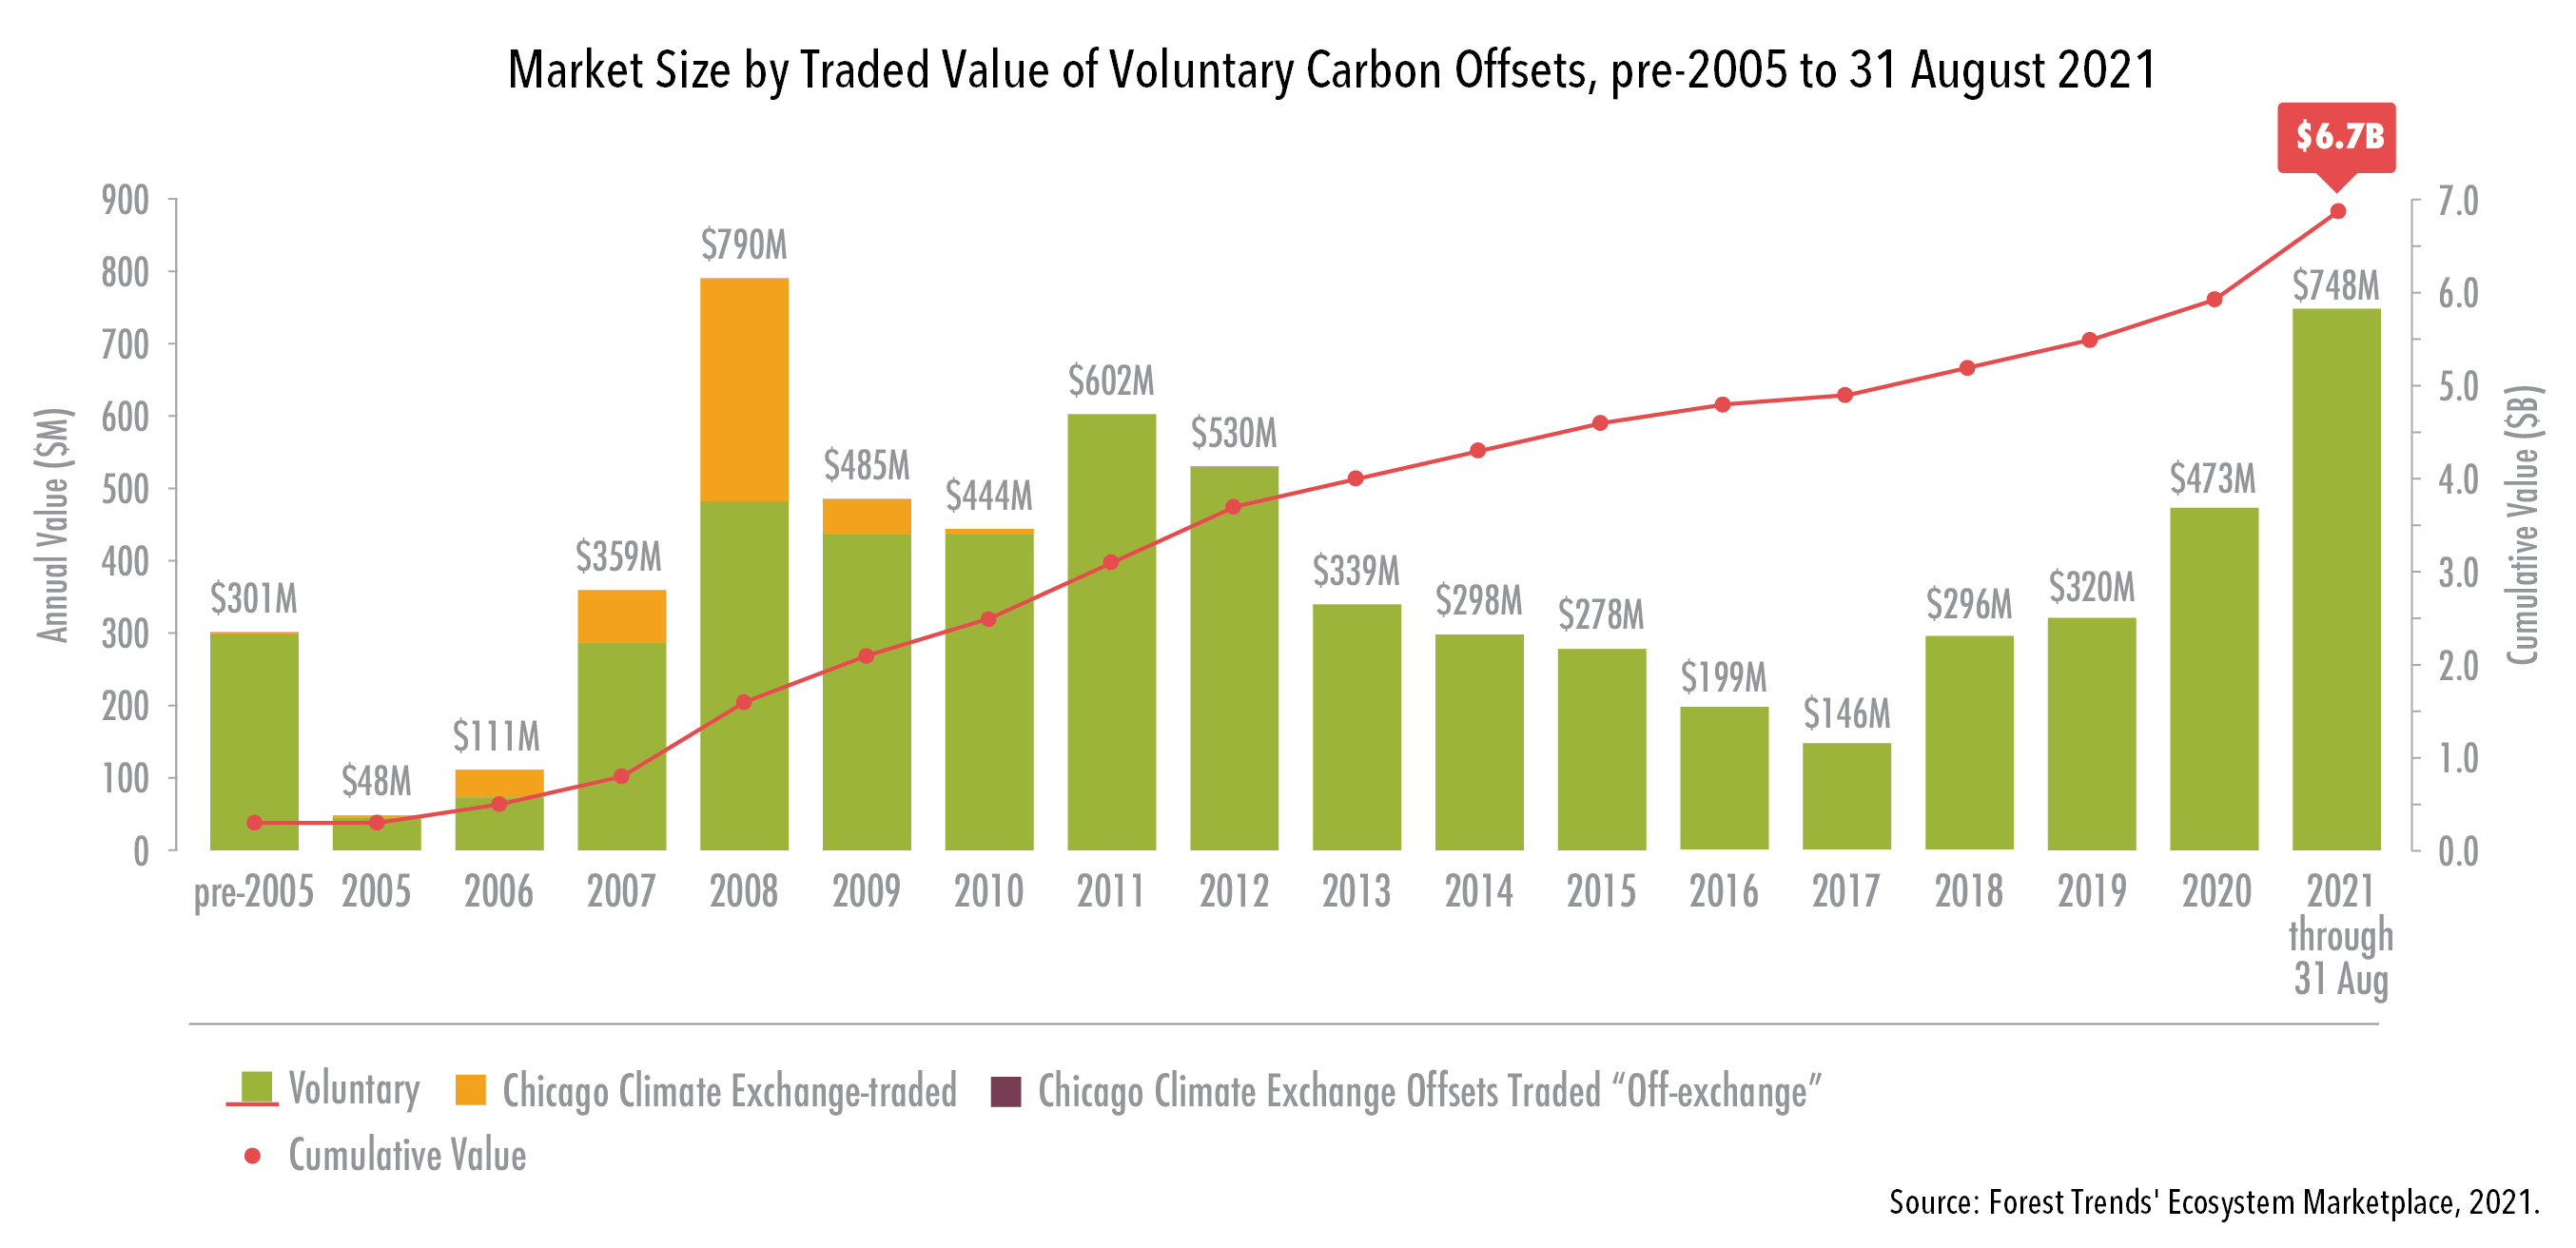 Voluntary Carbon Market Size by Voluntary Carbon Offset Issuances and Retirements, 2004 to 31 August 2021. Source: Forest Trends' Ecosystem Marketplace, 2021.